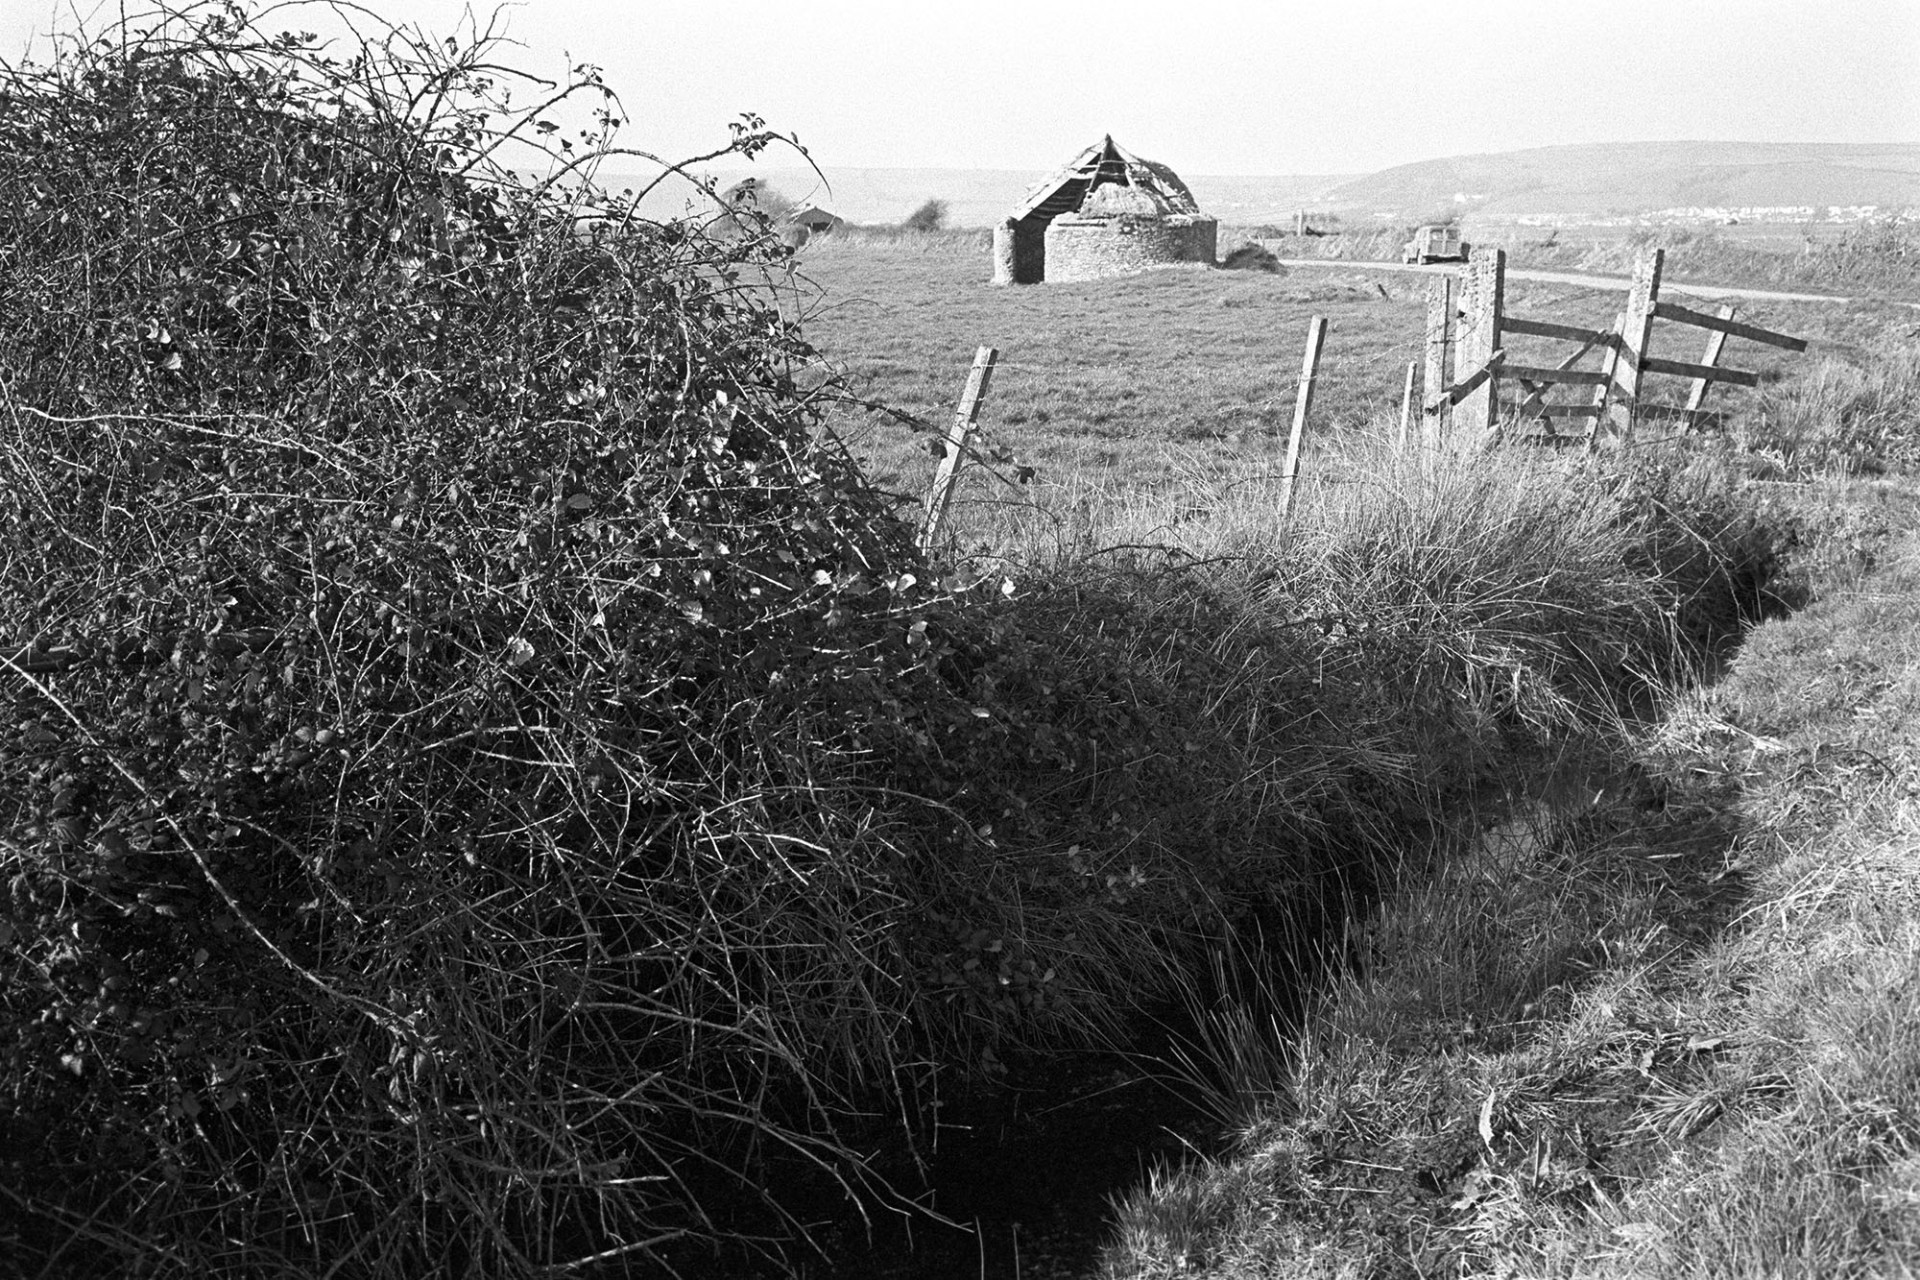 Round barn in landscape with brambles. 
[A ruined, circular thatched barn in a field at Braunton Burrows. In the foreground is a wooden fence and ditch adjacent to the field.]